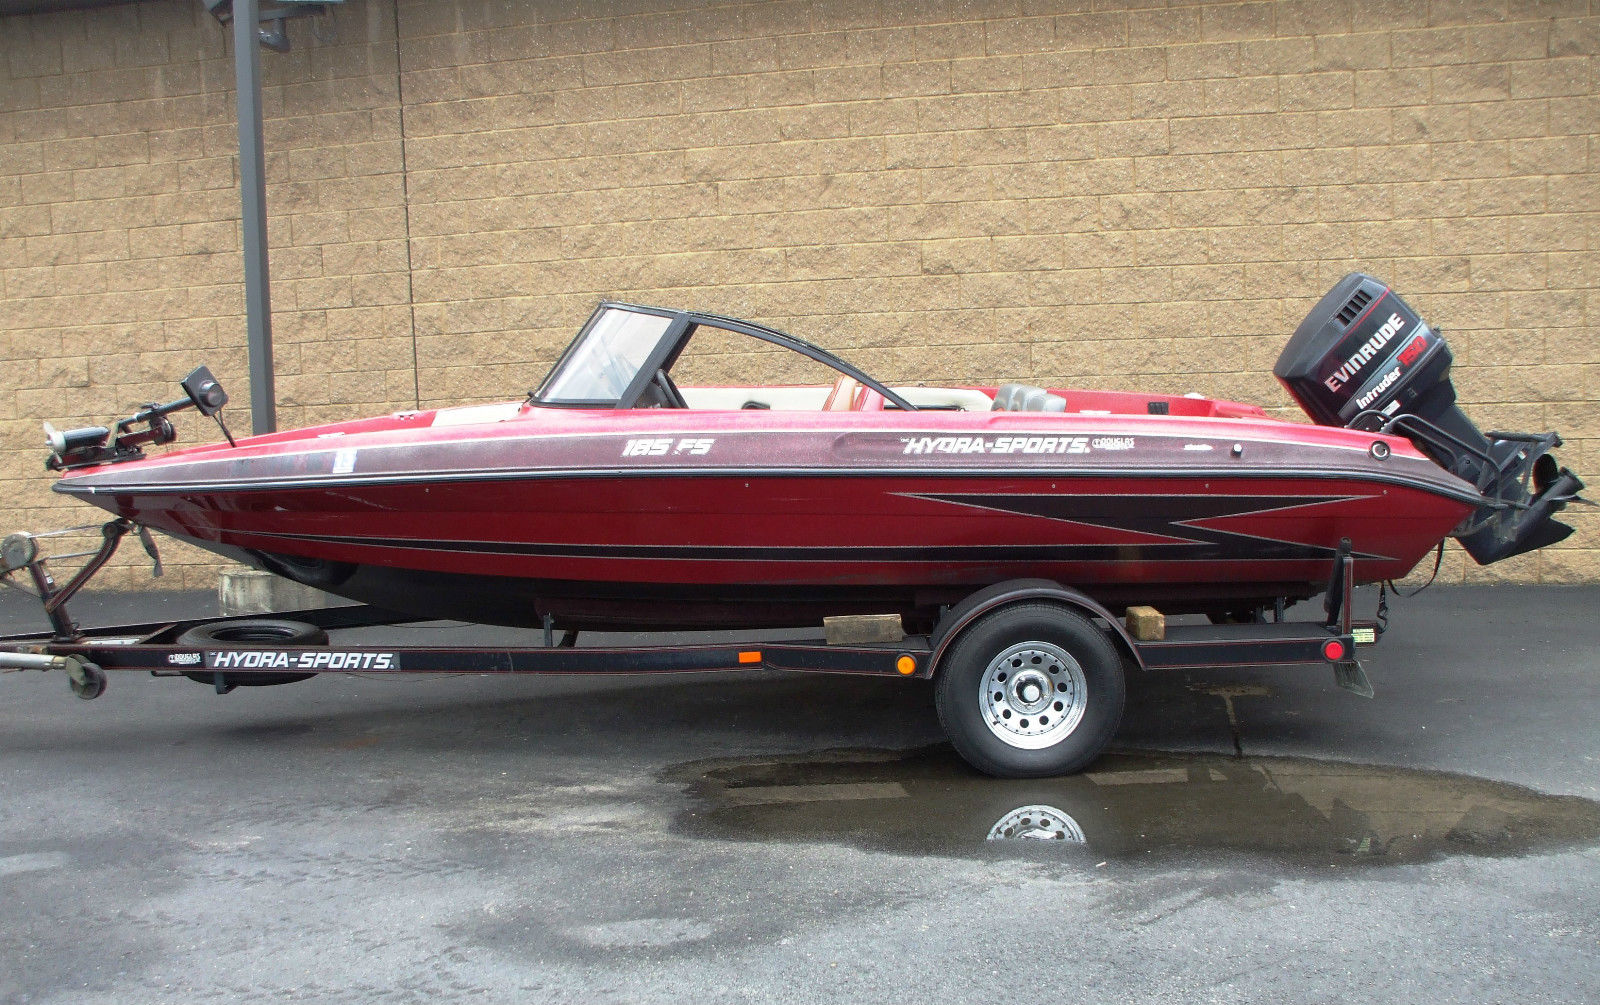 1985 hydra sport bass boat, good condition, runs great and comes with a cov...